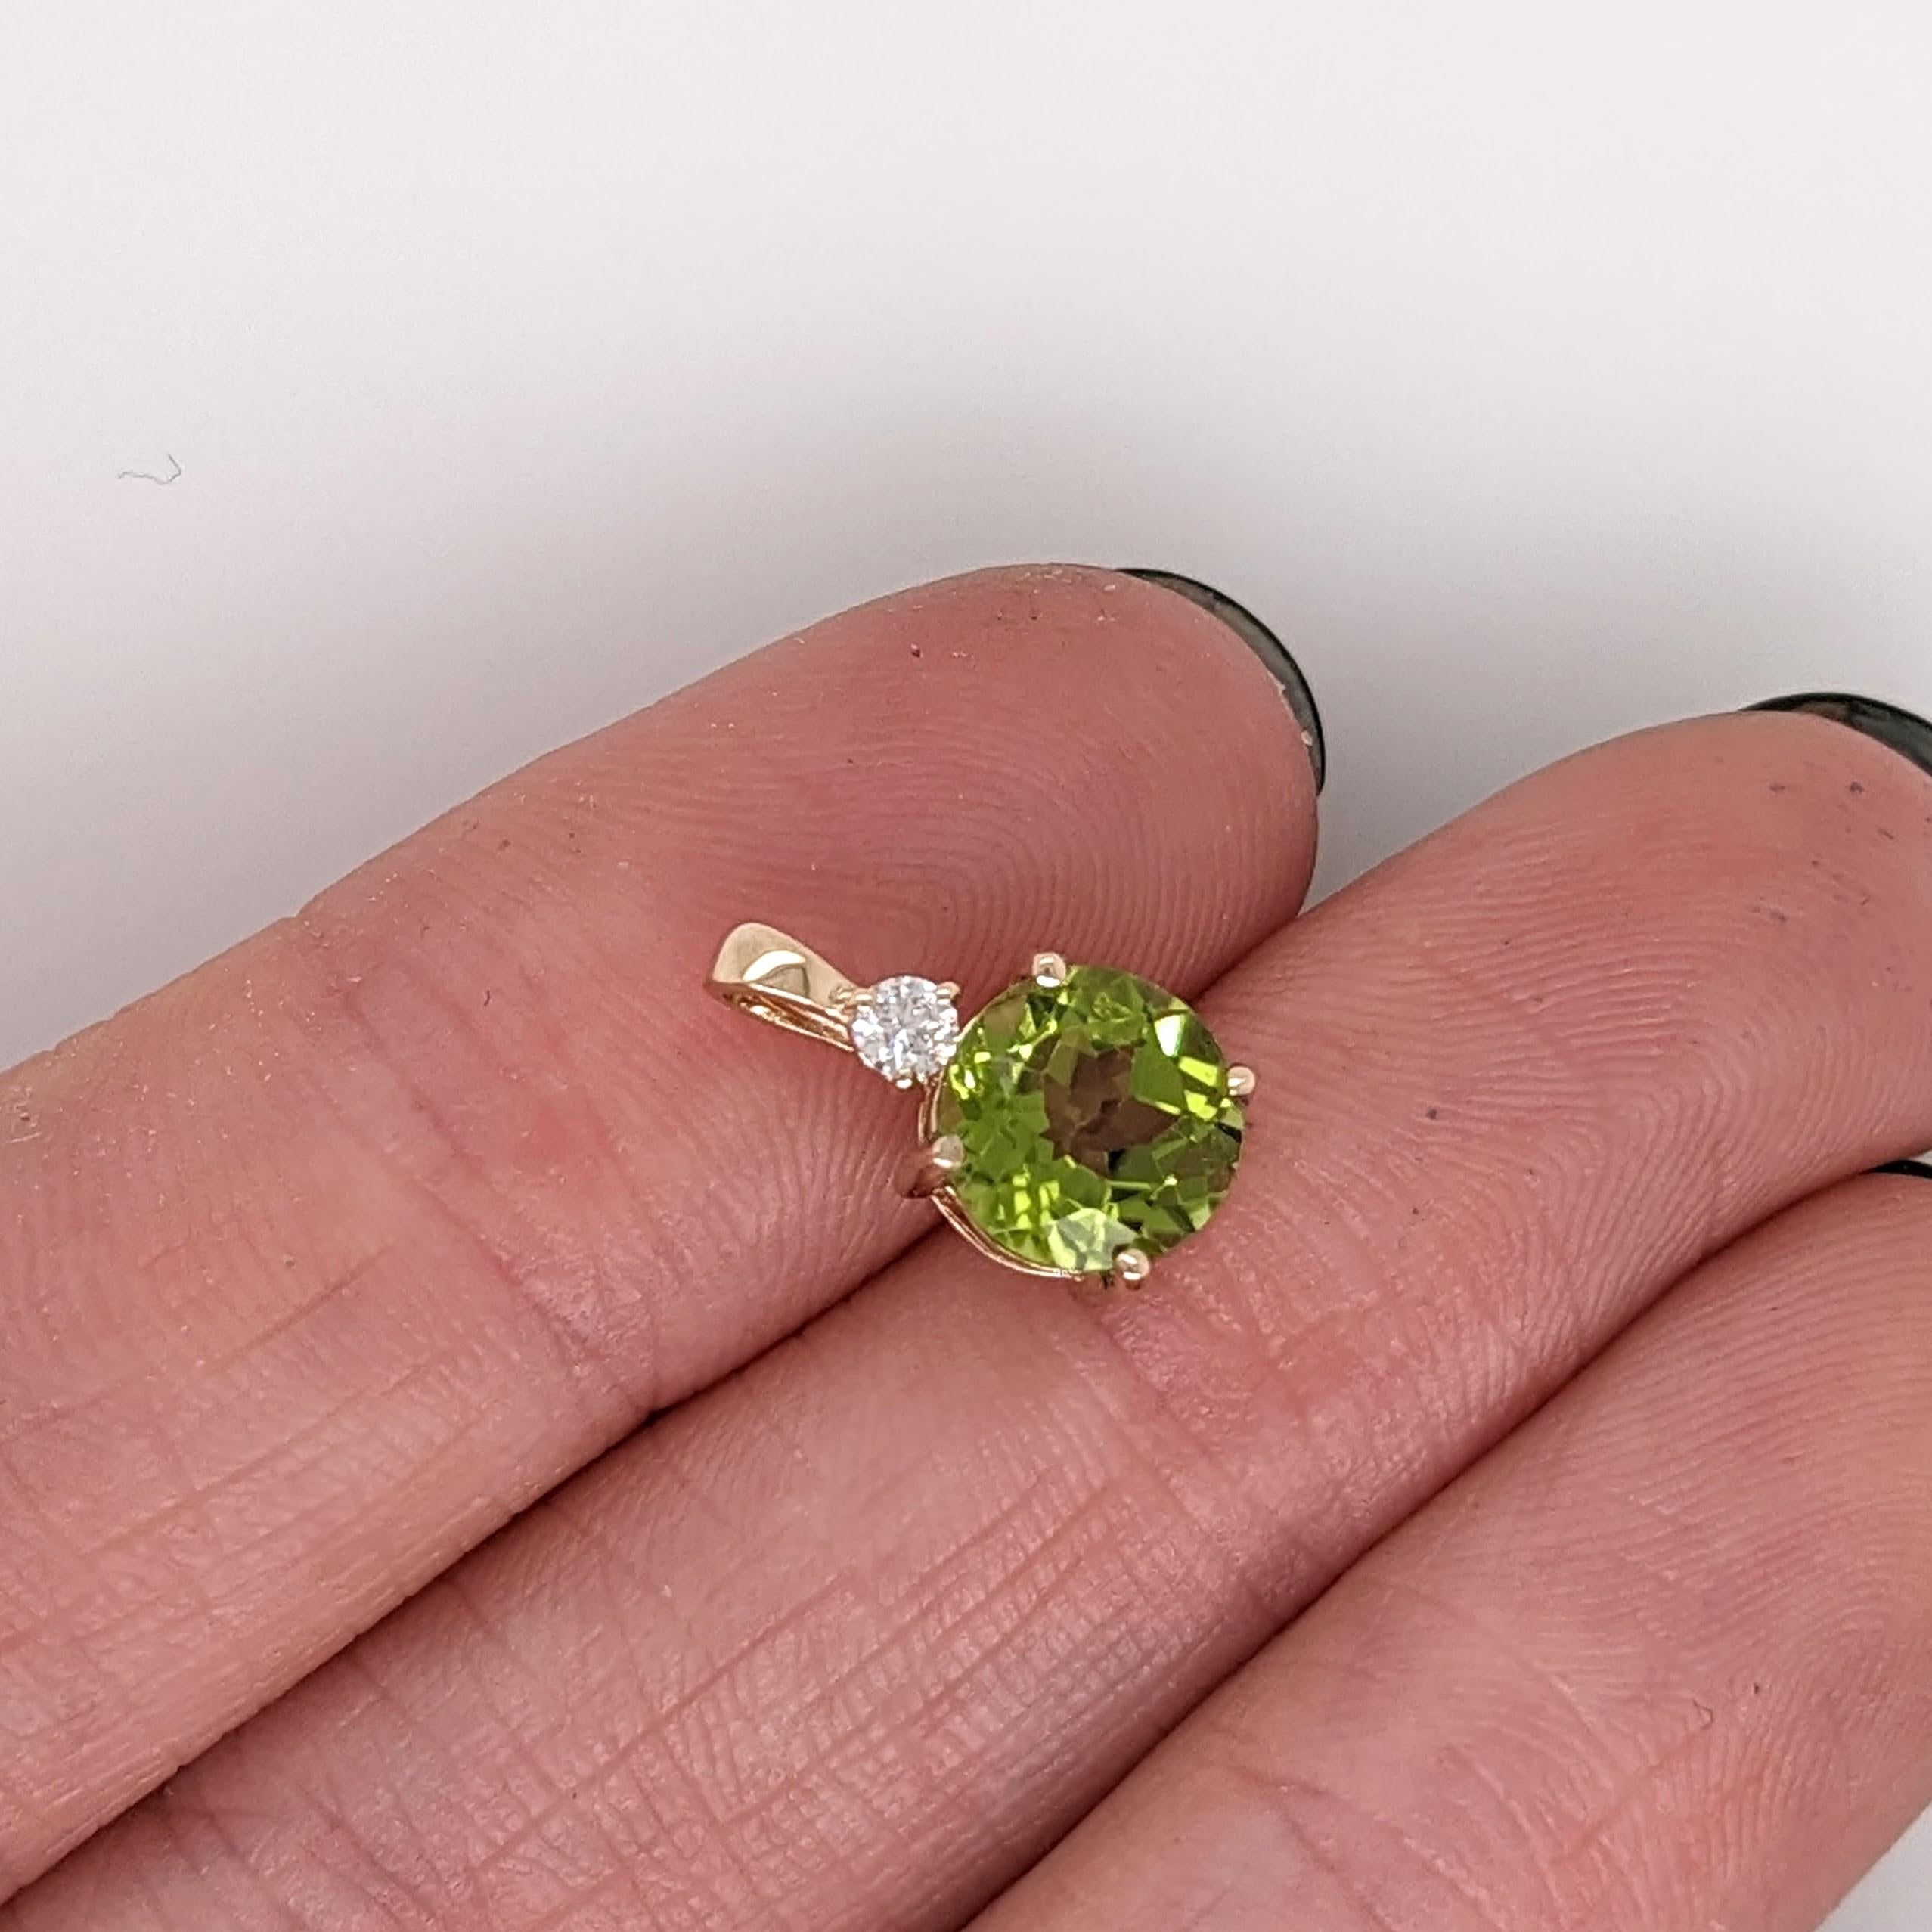 2ct Peridot Pendant with Natural Diamond in 14K Solid Yellow Gold